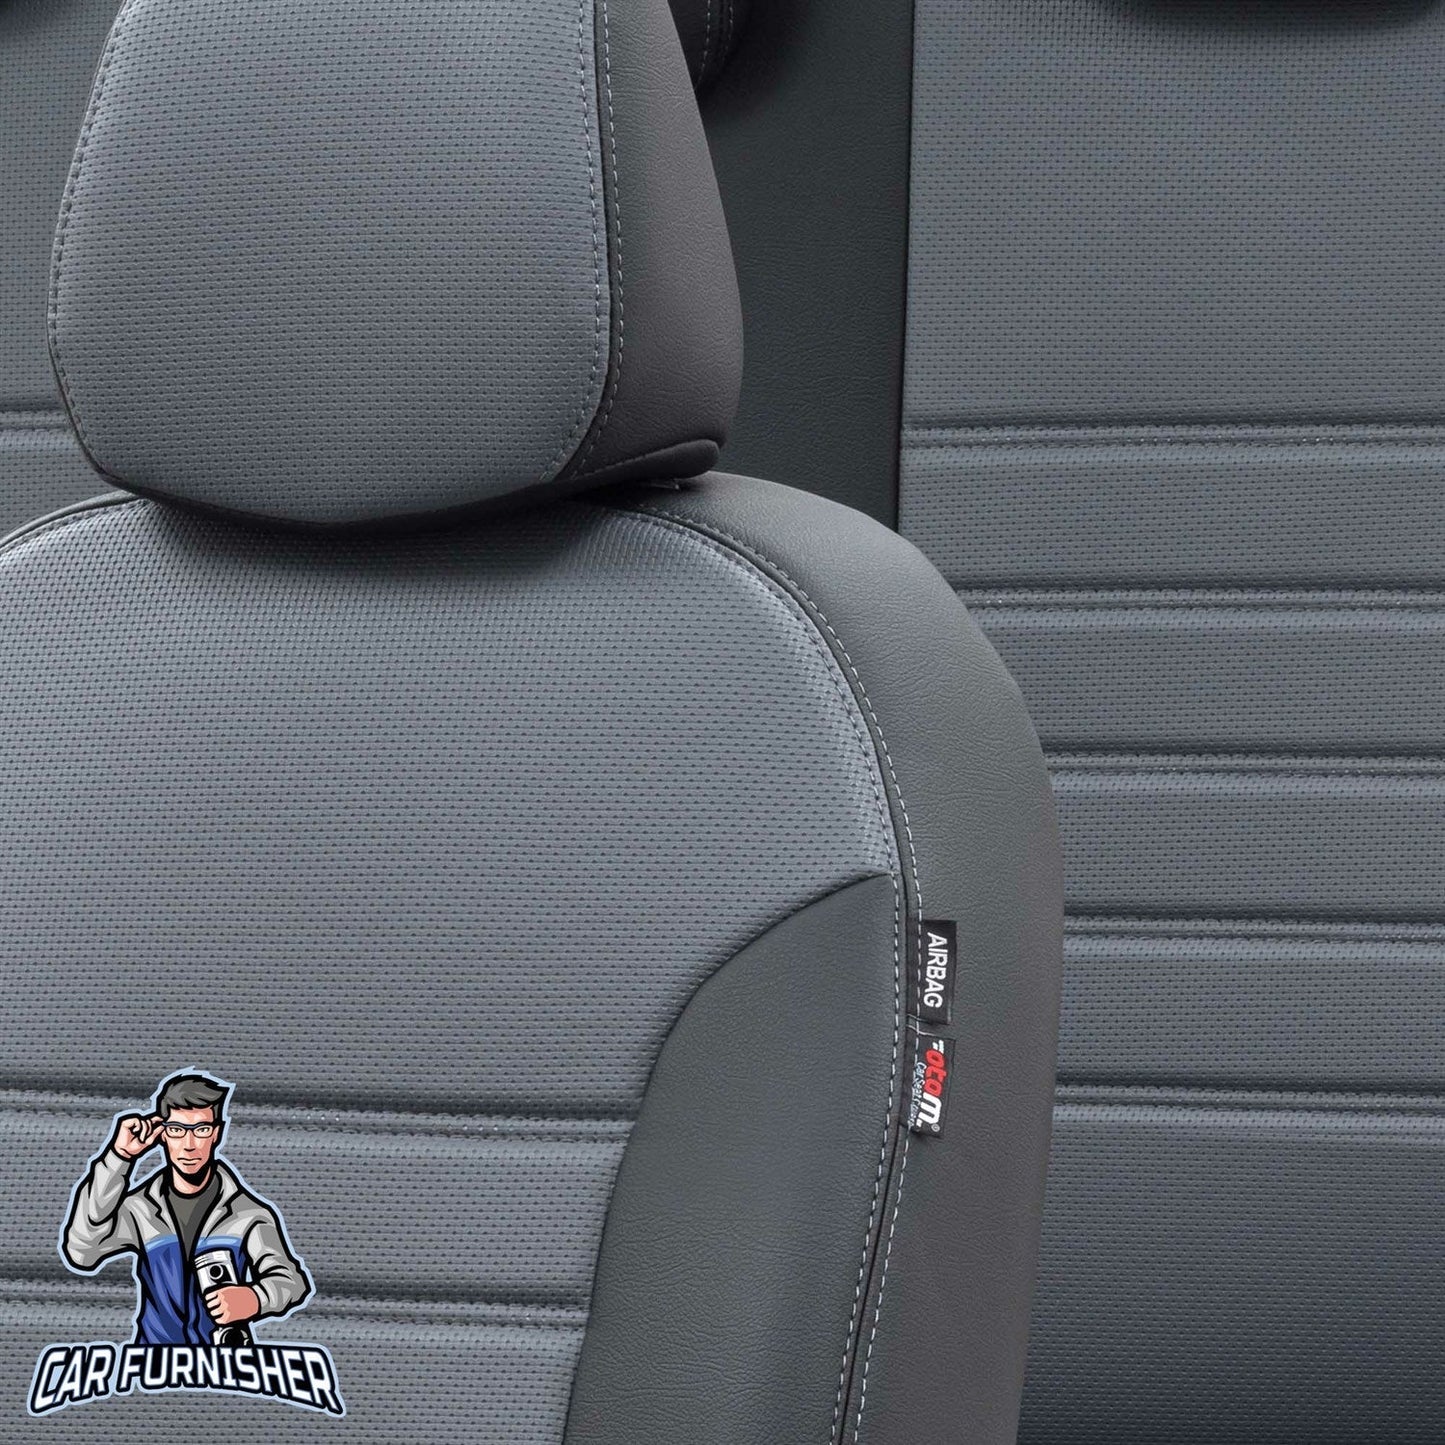 Fiat Marea Seat Covers New York Leather Design Smoked Black Leather